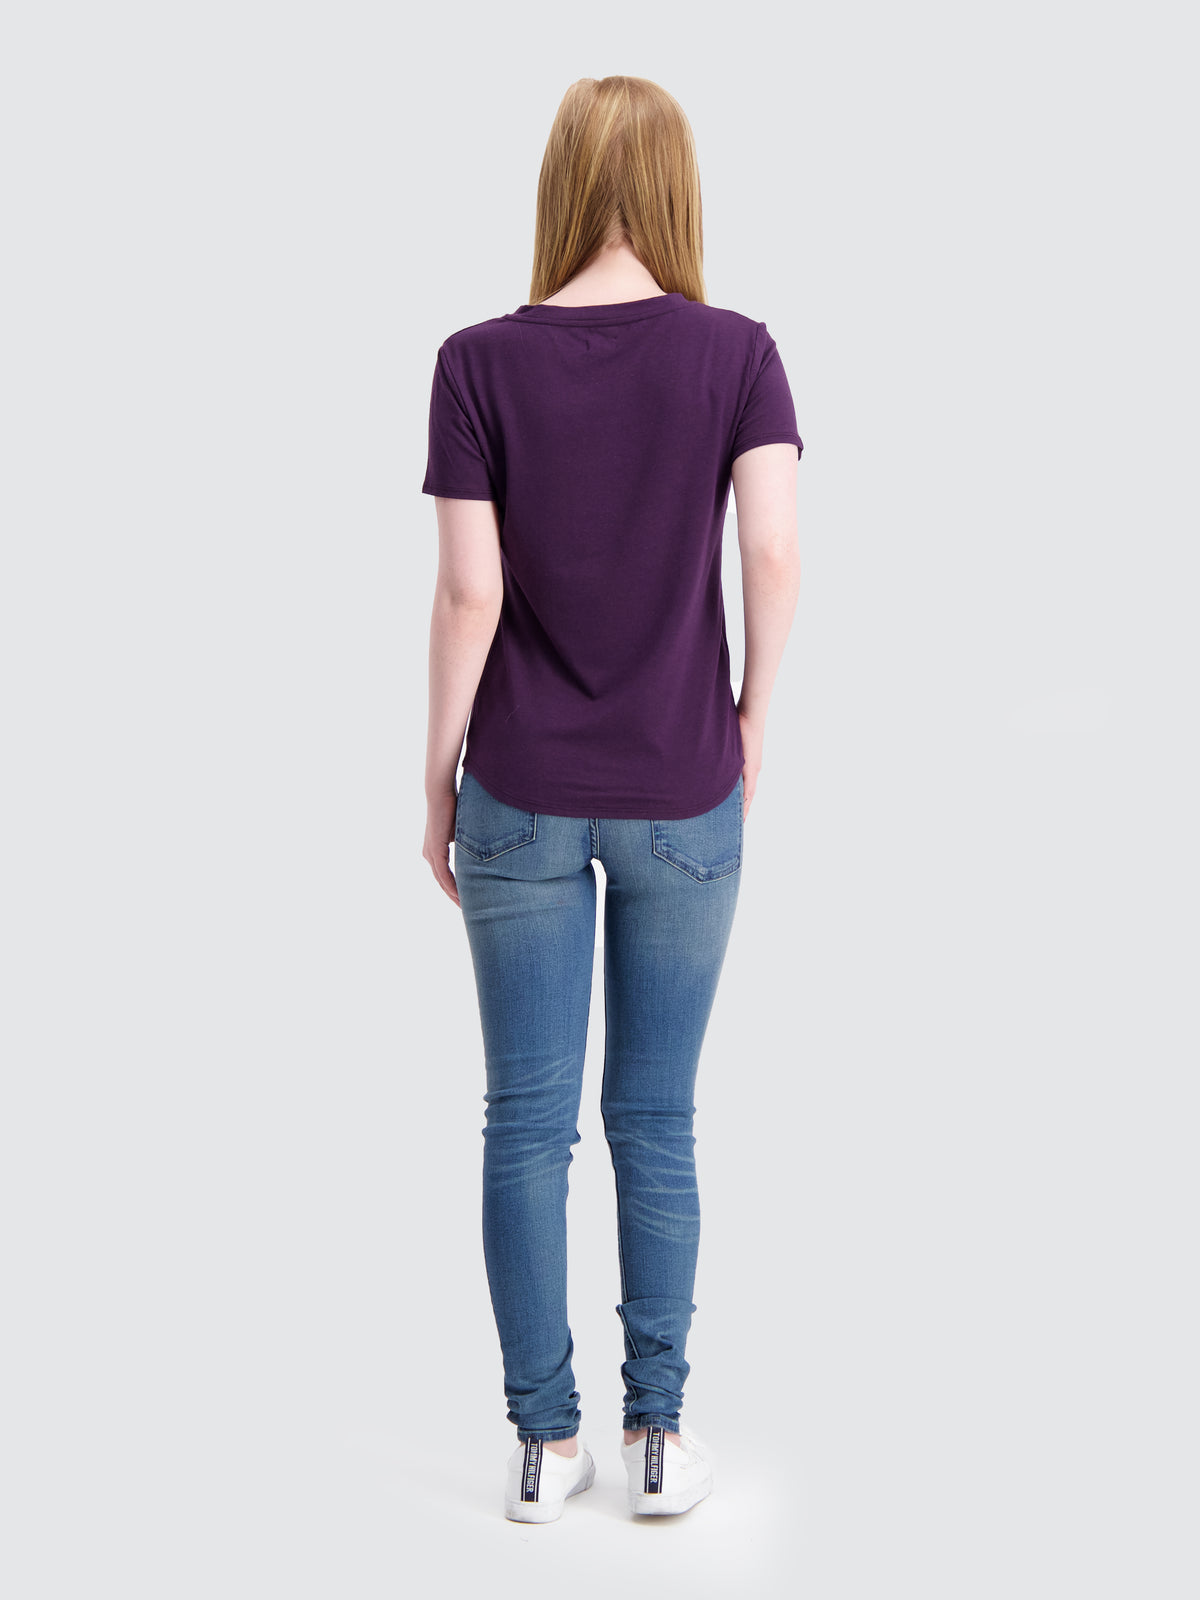 Two Blind Brothers - Womens Women's SS Henley Plum